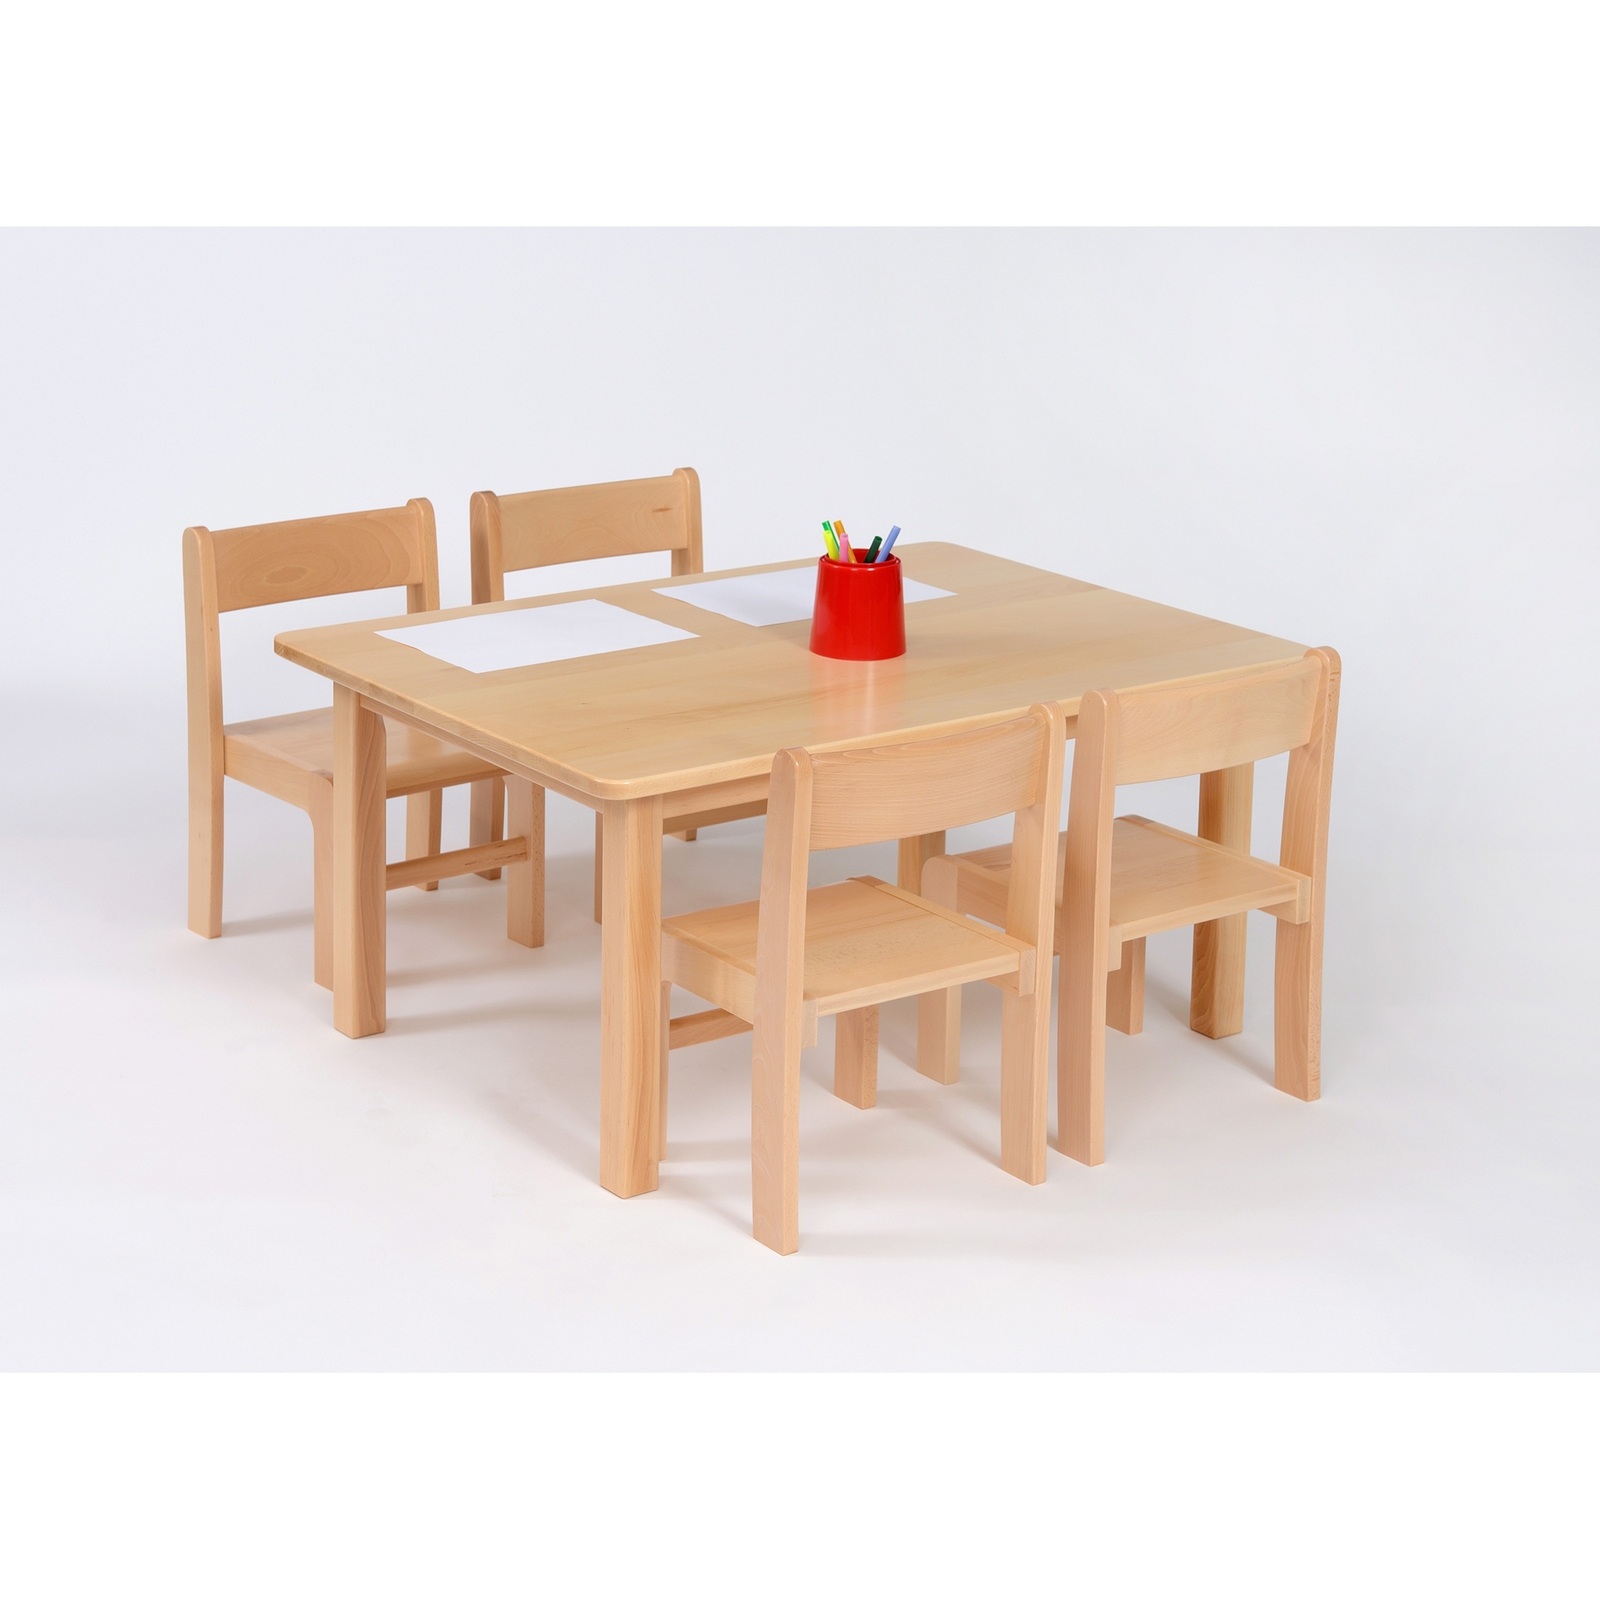 Galt Rectangular Table with 4 Chairs - 3-4 Year Olds - Per Set